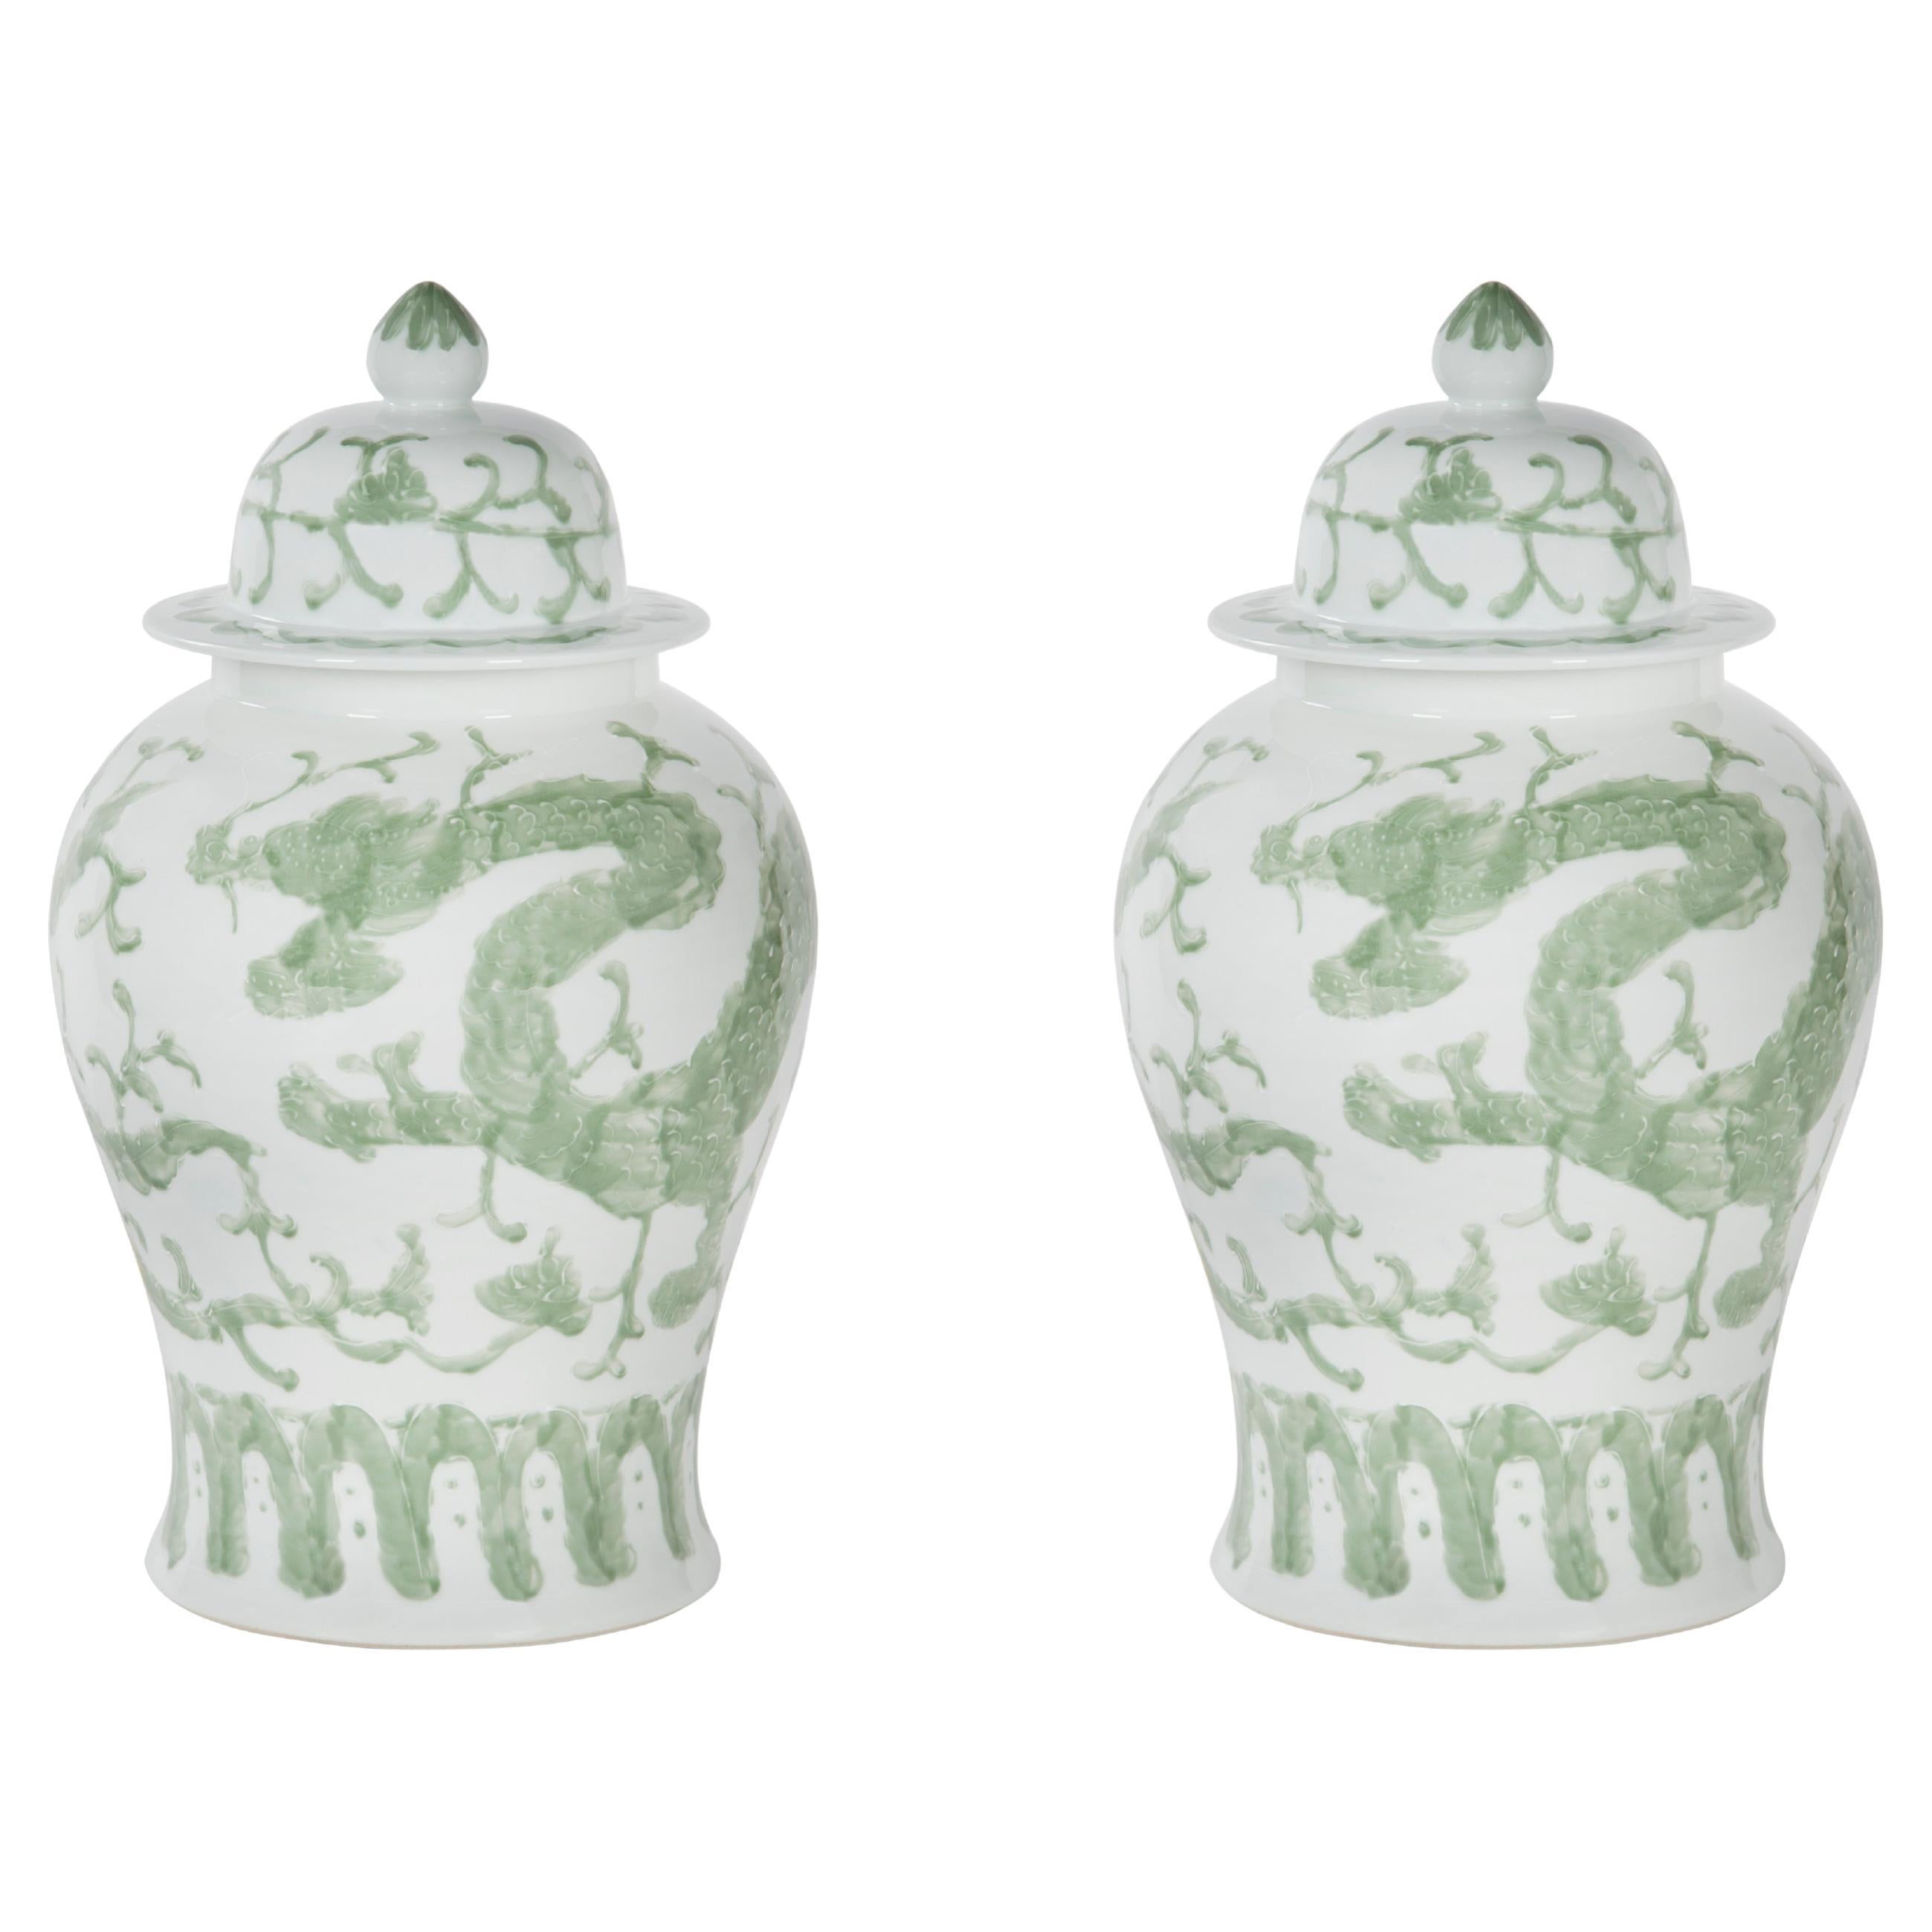 Set of 2 Porcelain Shu Pots with Lid, Green White, Handmolded & Handpainted For Sale